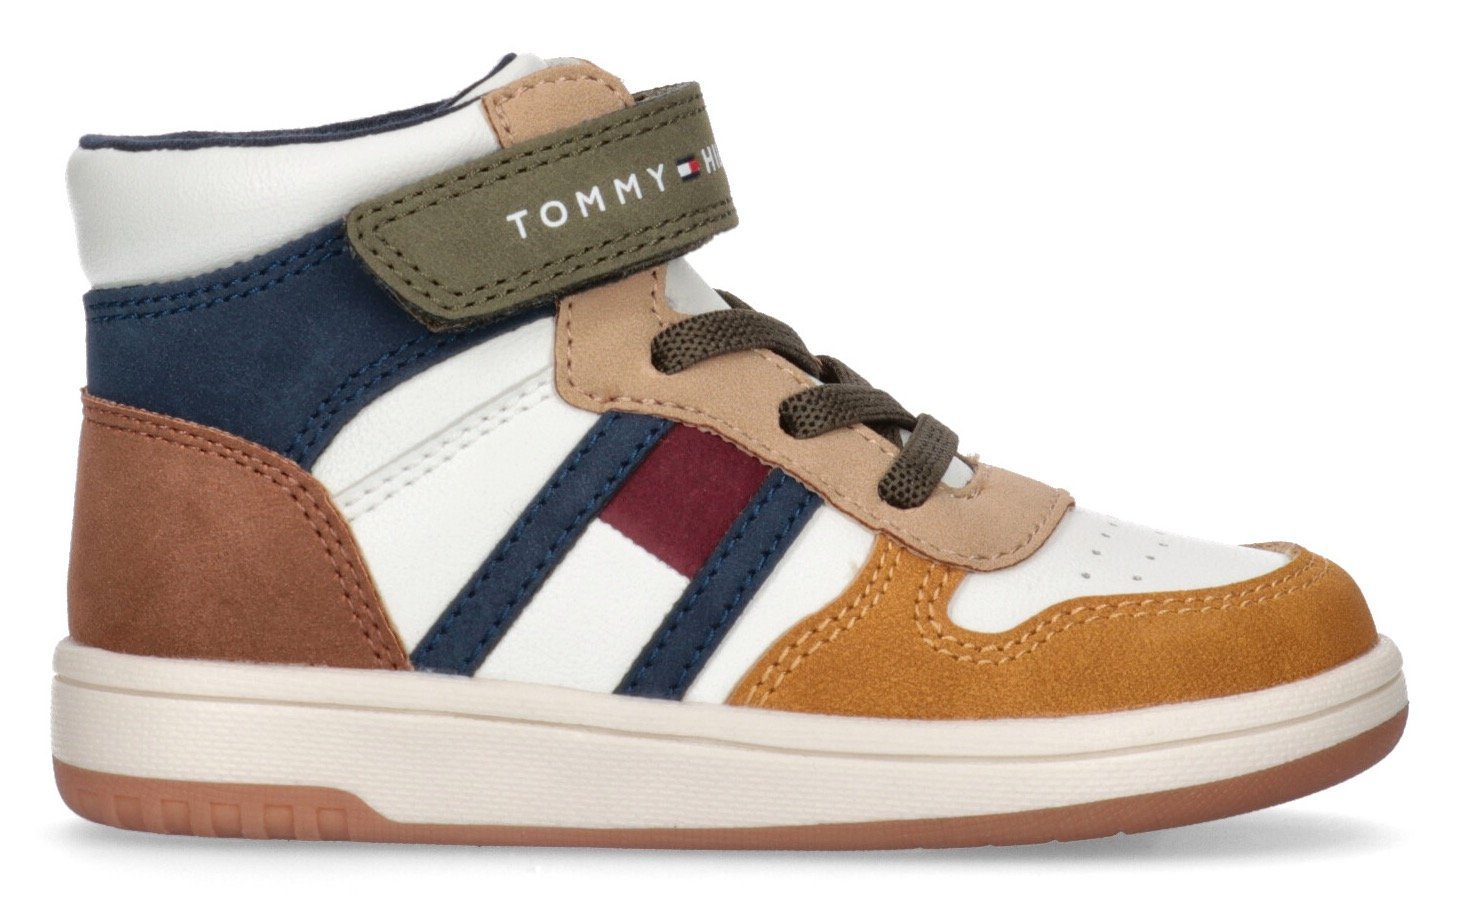 TOP LACE-UP/VELCRO Hilfiger Tommy colorblocking im SNEAKER Sneaker HIGH modischen FLAG Look